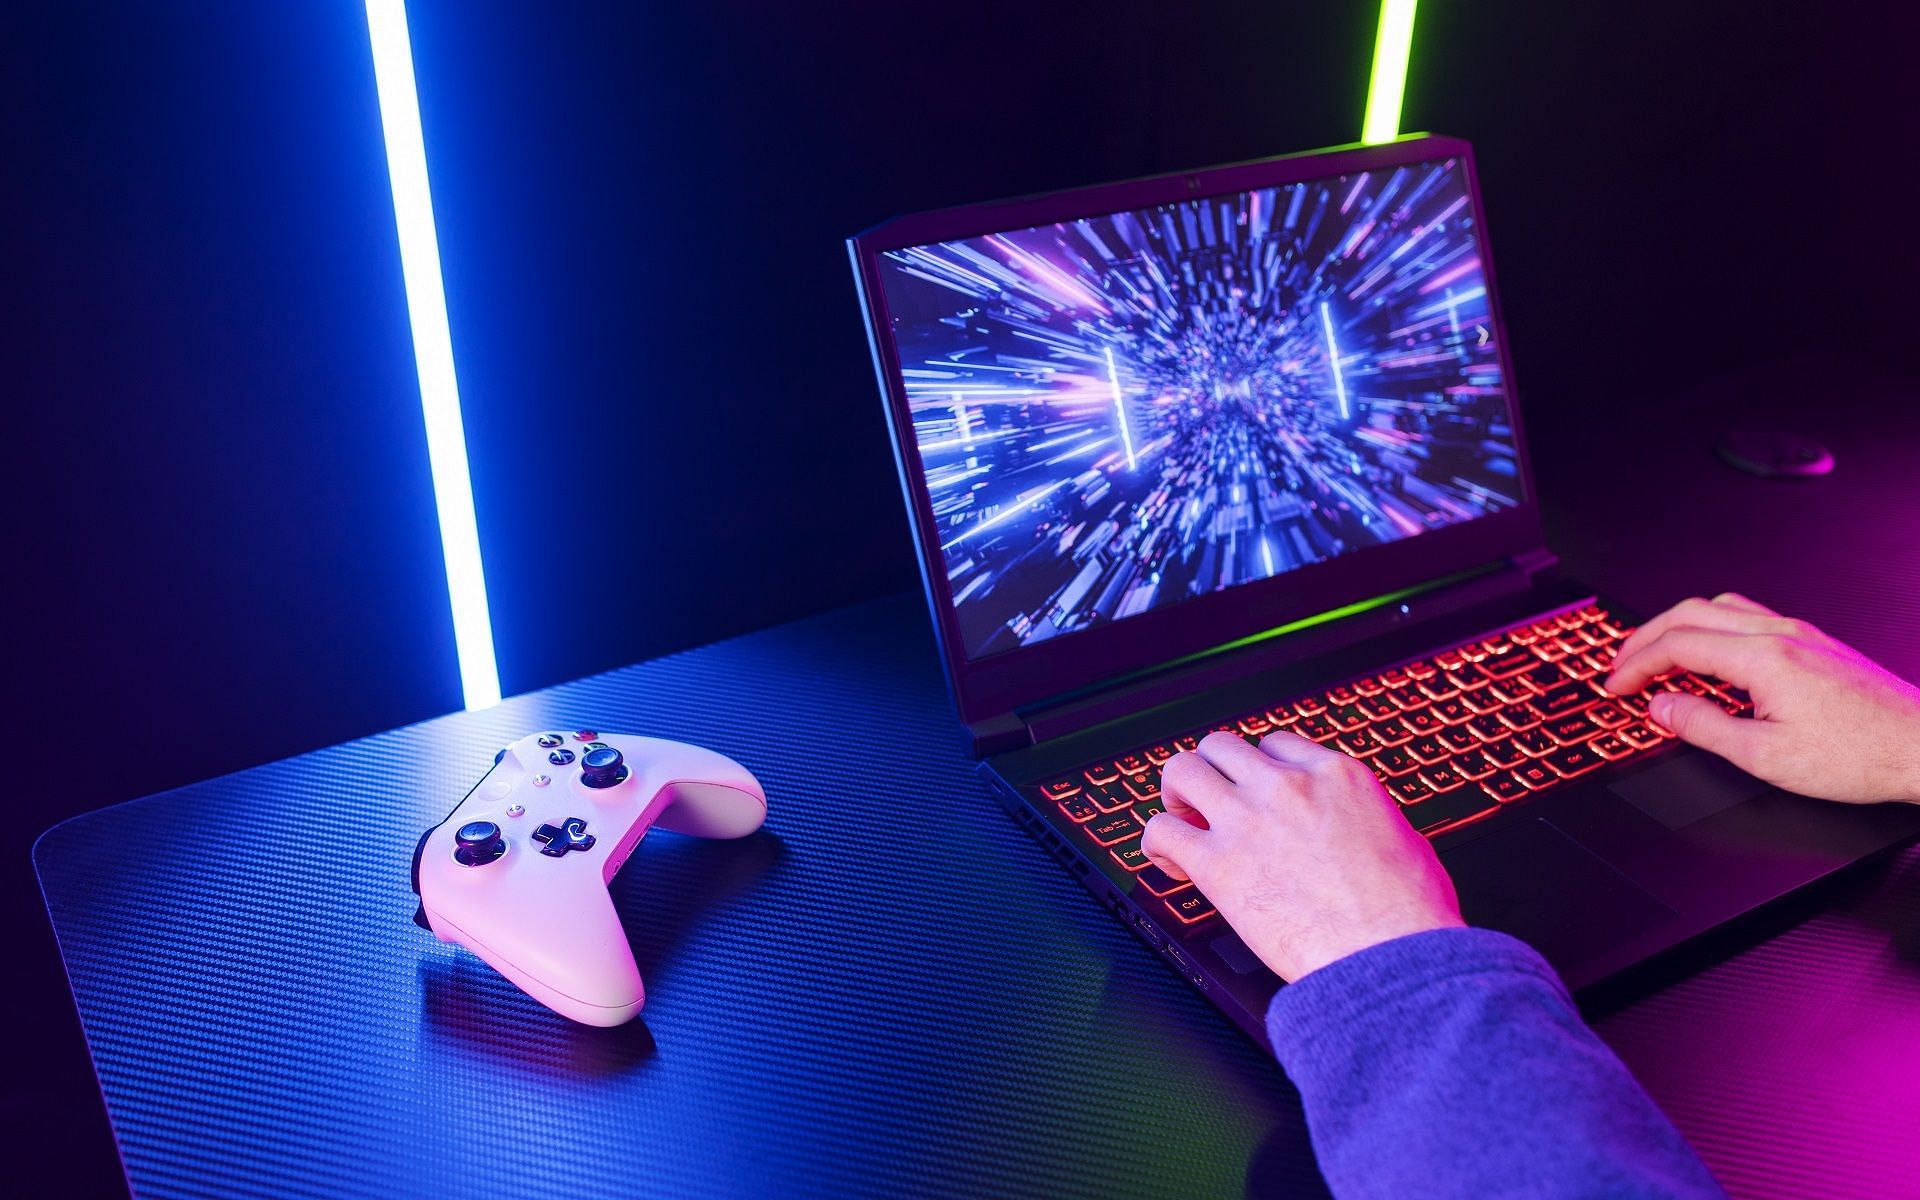 The Best Games To Play On A Laptop